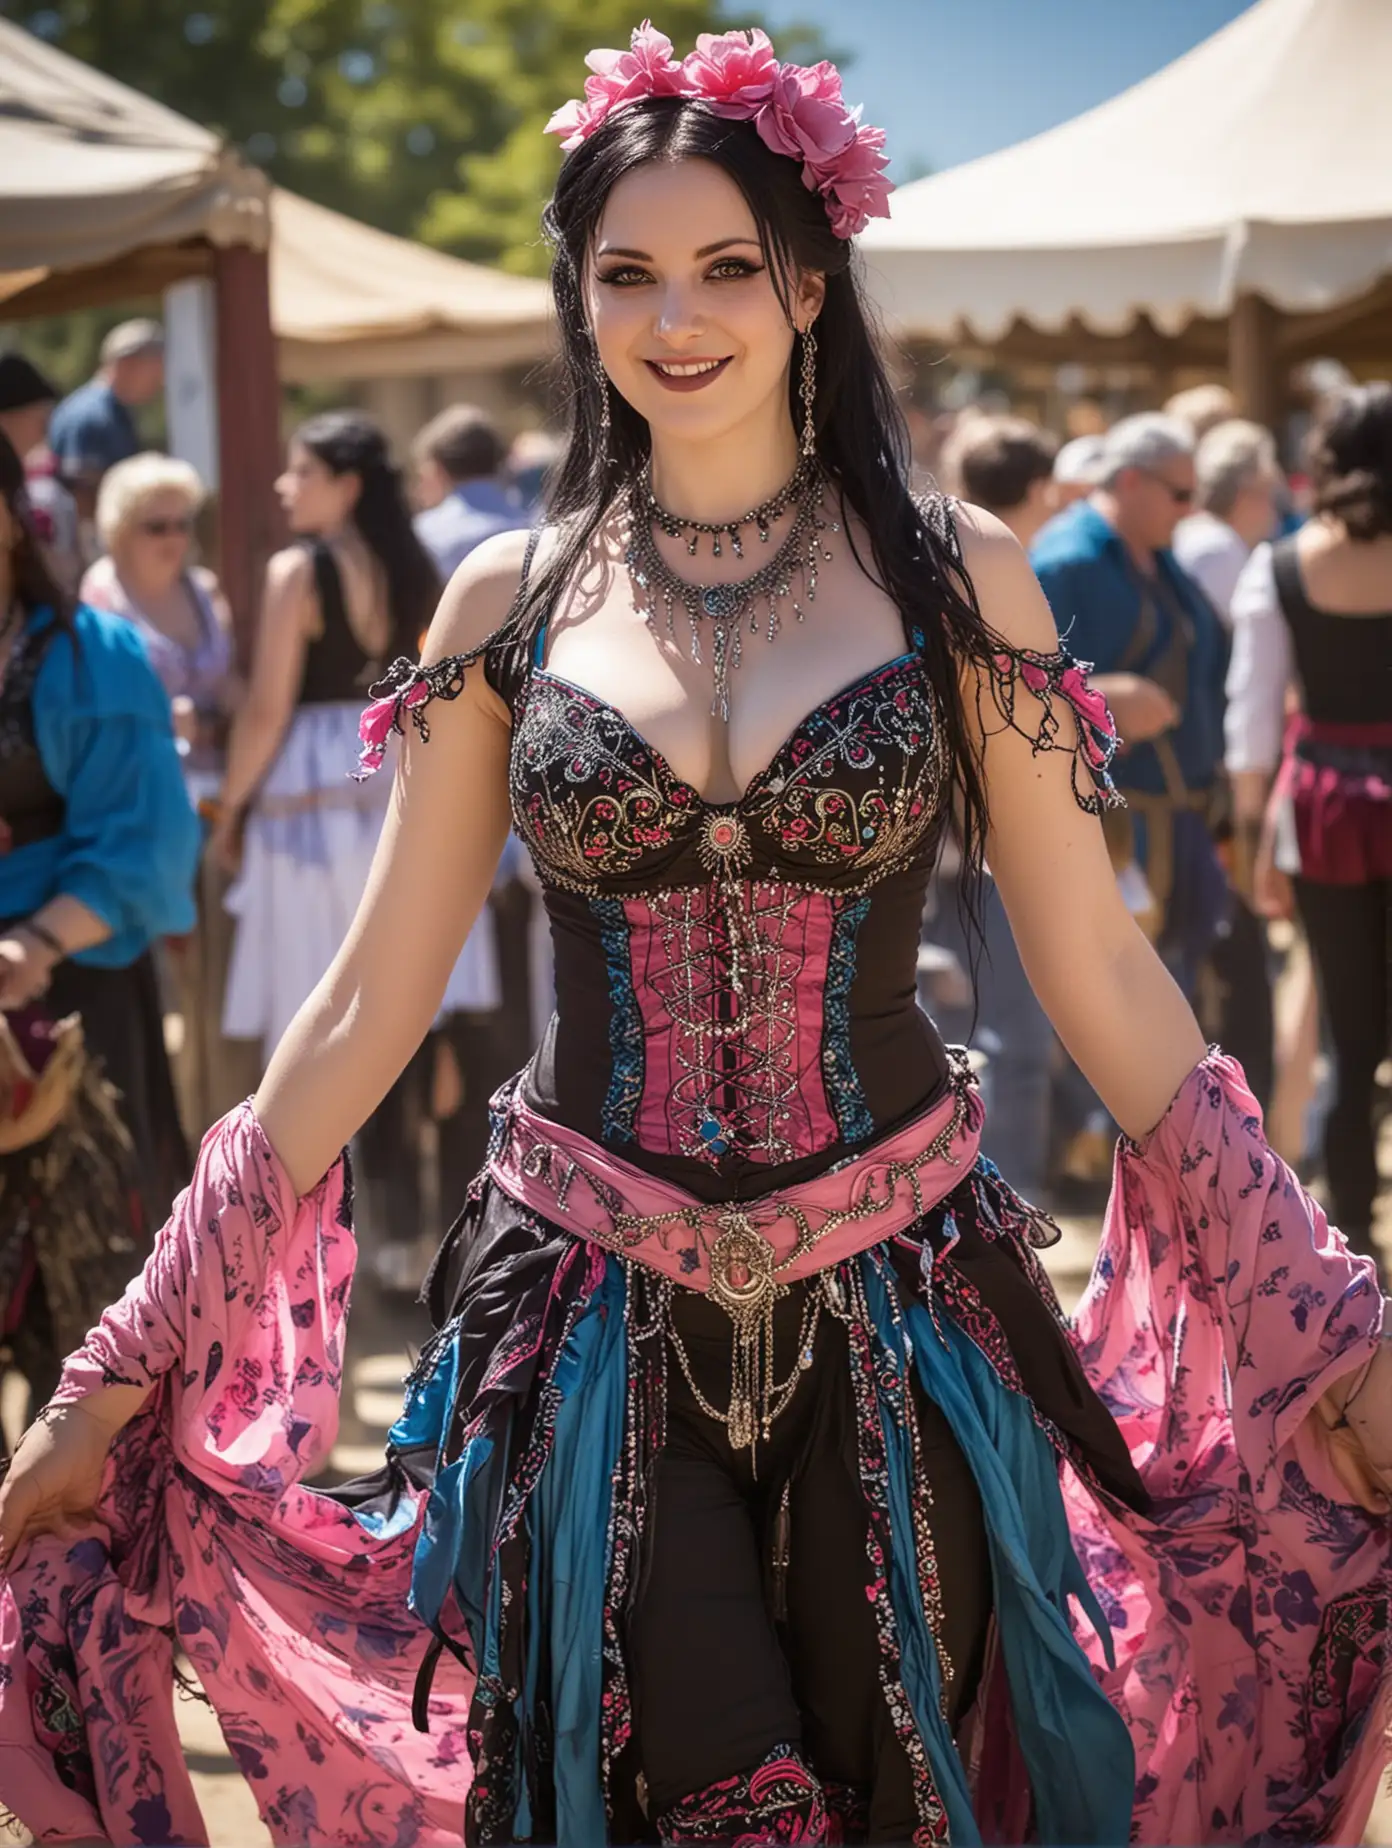 Beautiful goth dancer at the Ren-faire,  her whimsically colorful outfit is brilliant in the sun, heavy cleavage,  happy-go-lucky , pinks and blues and whites,  belly dancing 